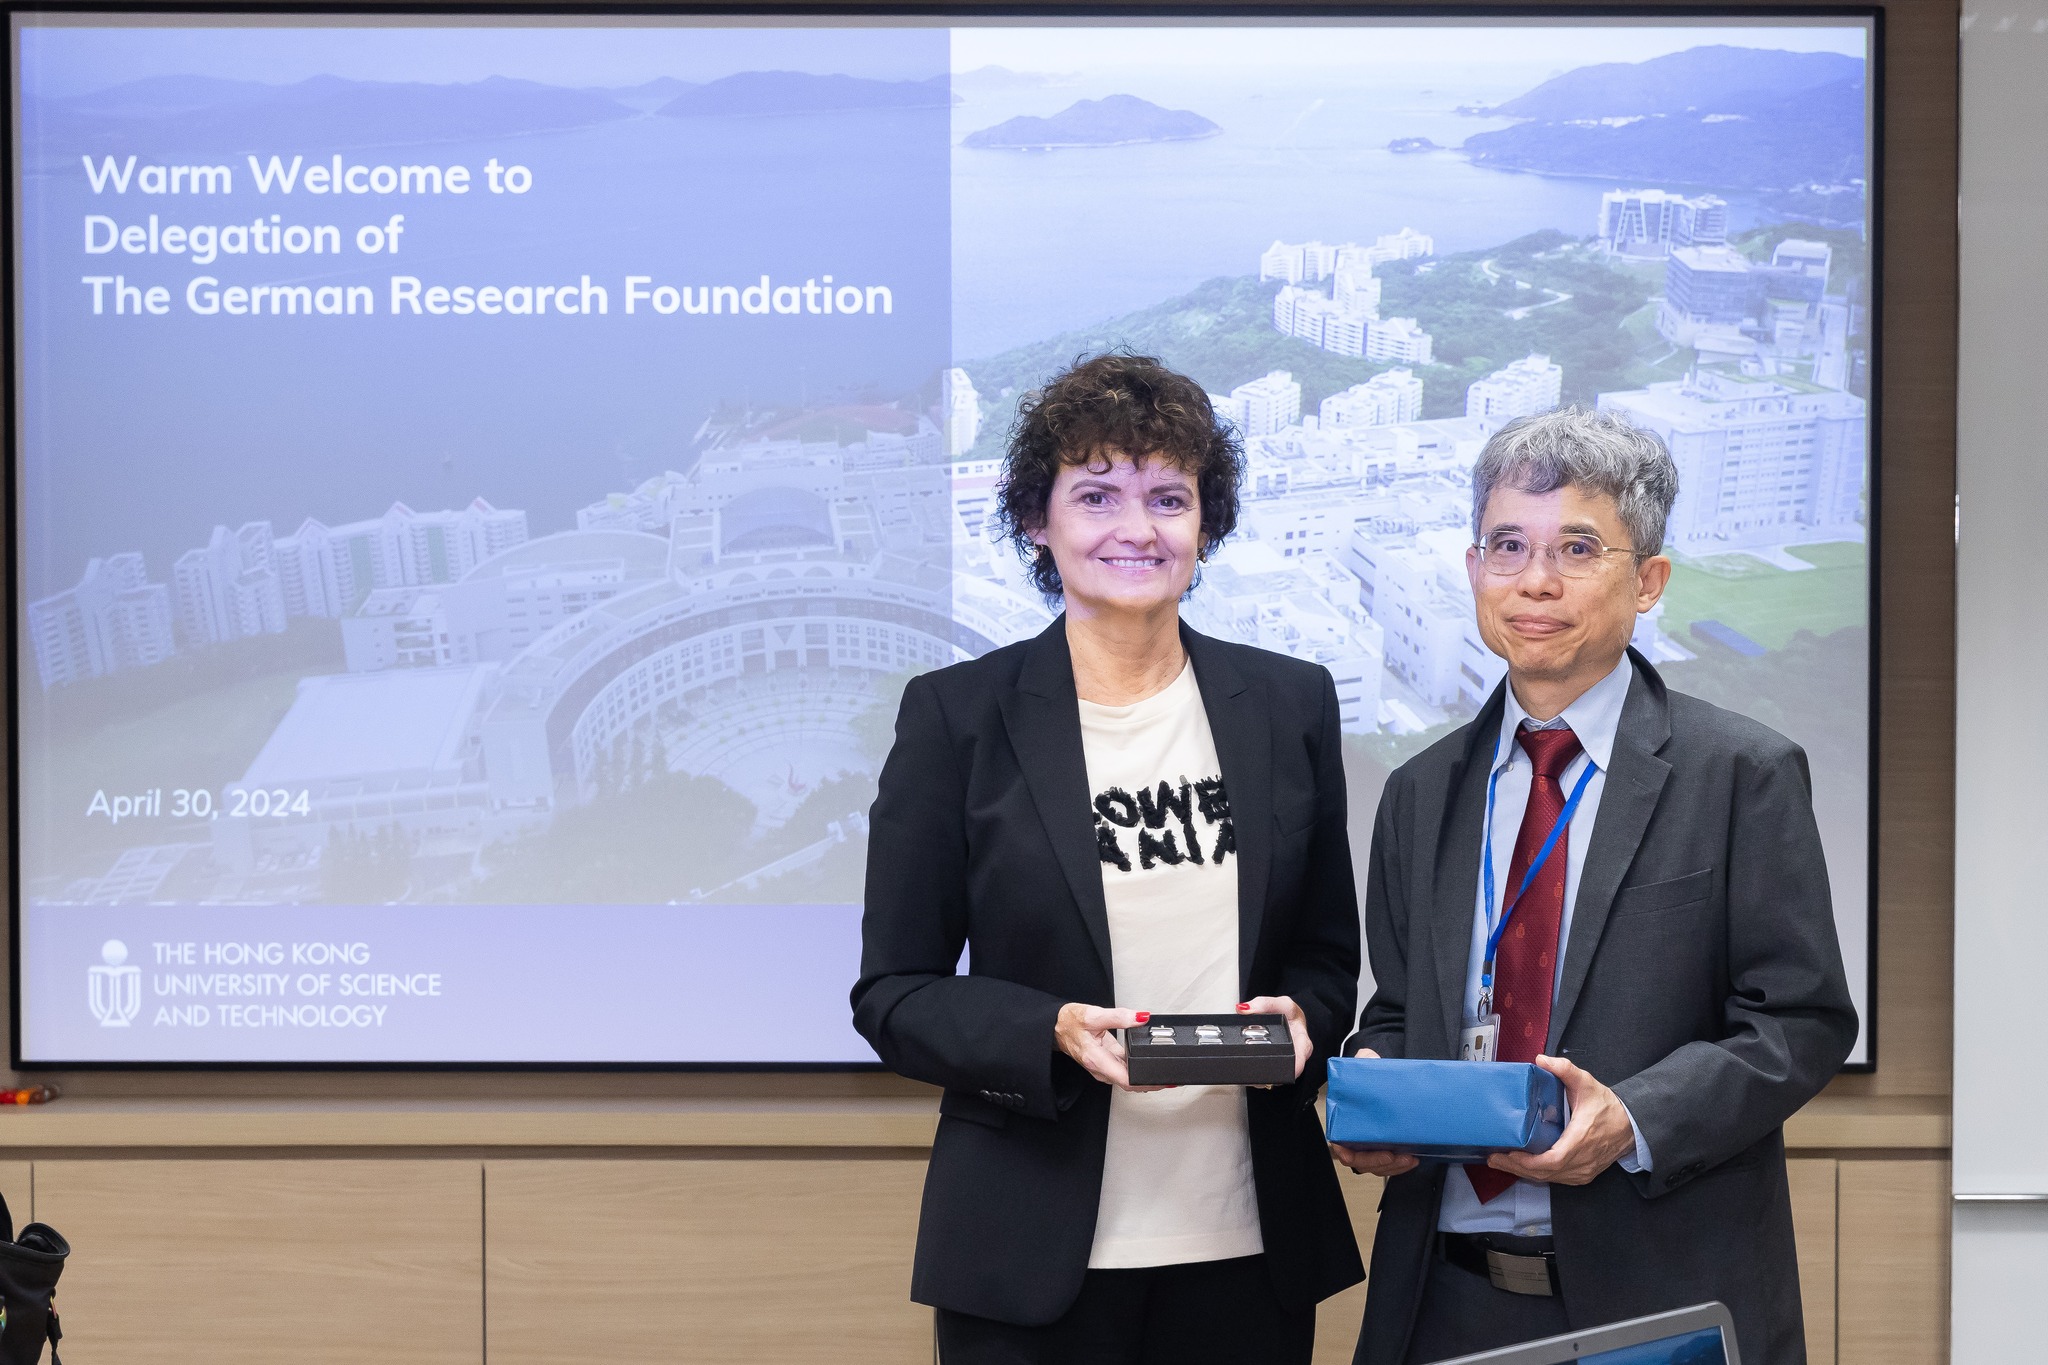 HKUST Associate Vice-President for Research and Development (Research) Prof. CHAN Che Ting (right) exchanges souvenir with Dr. Annette SCHMIDTMANN (left) from German Research Foundation.